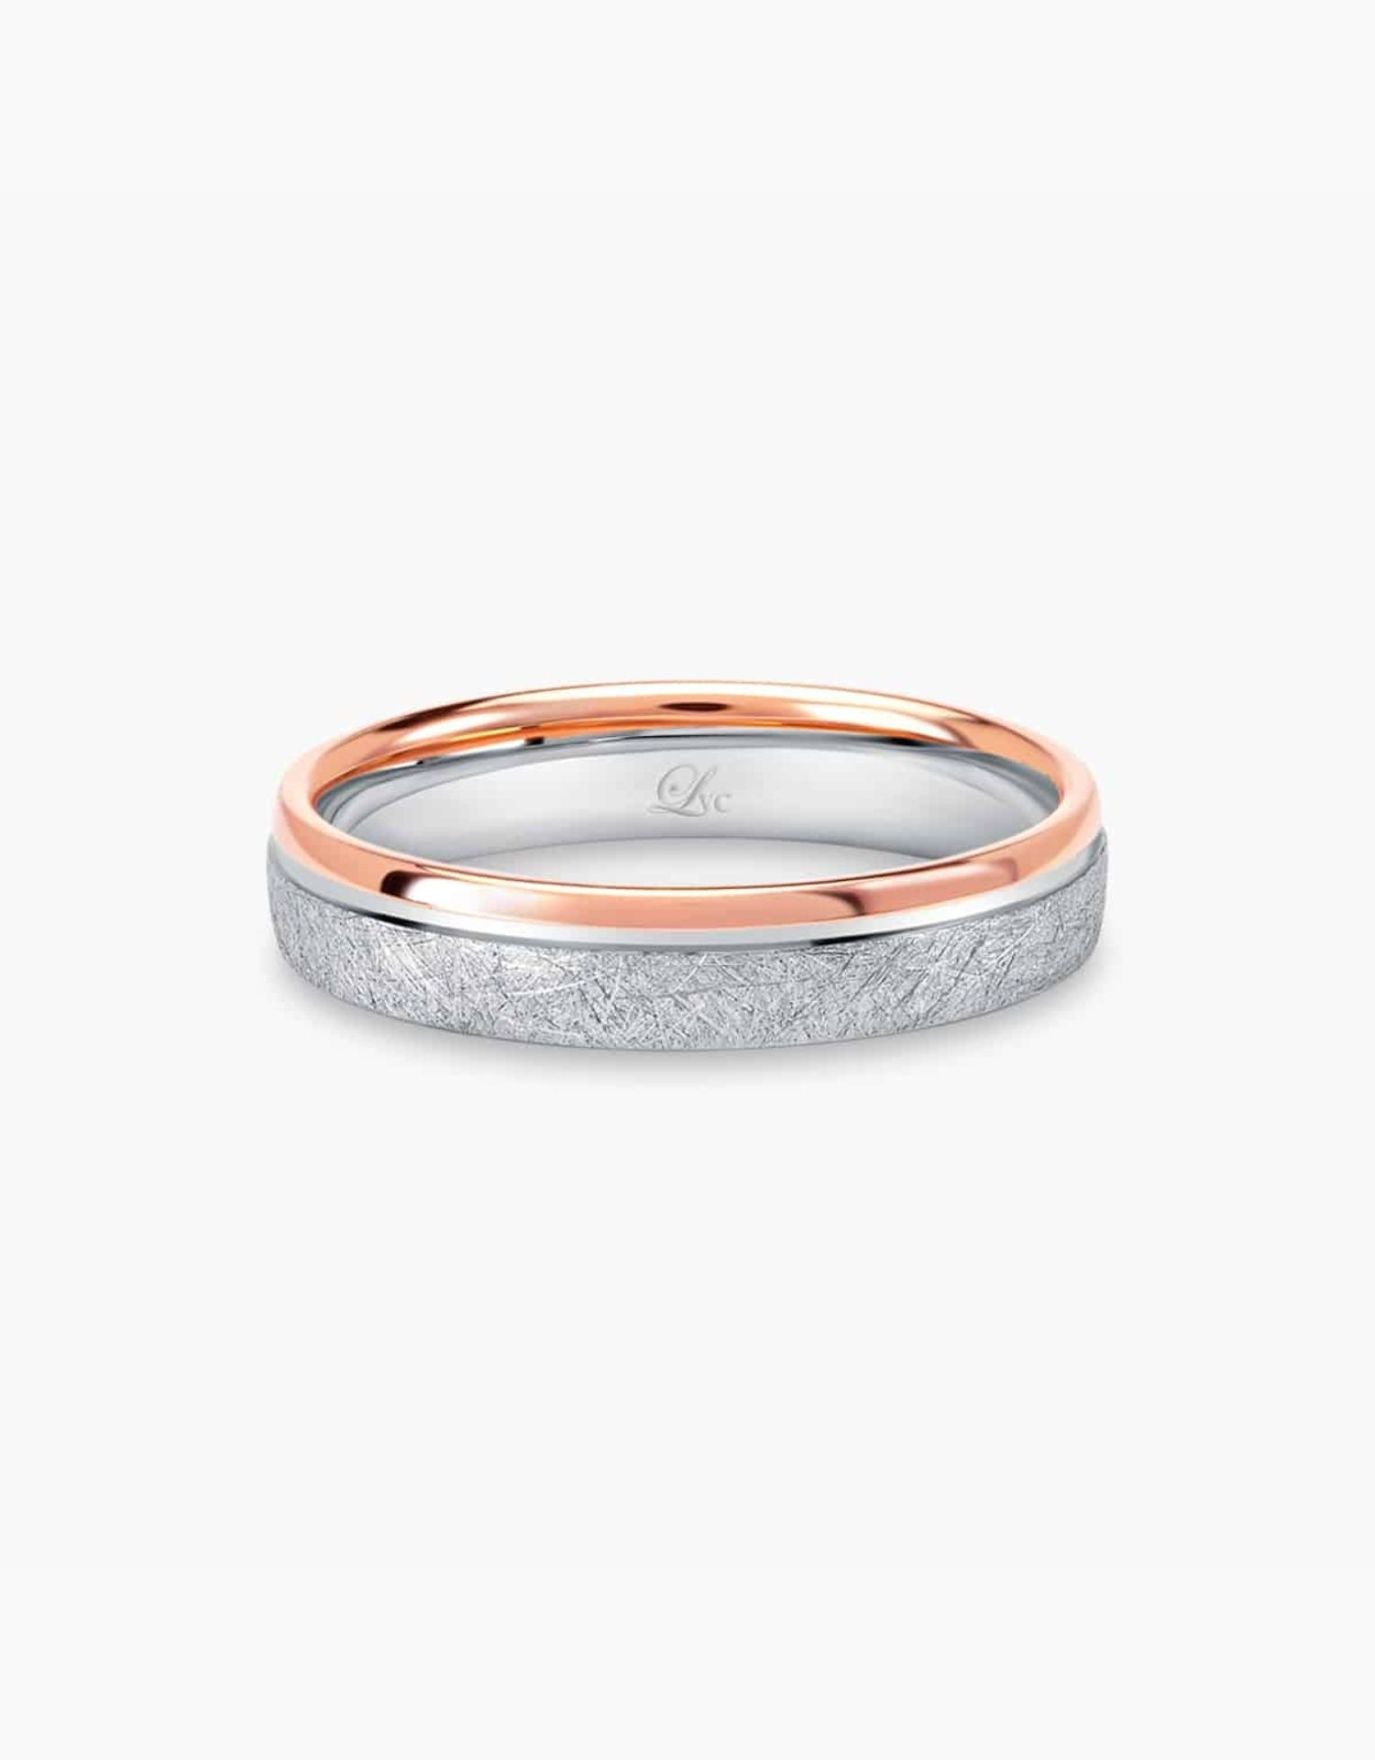 LVC Soleil Wedding Band in dual matte and glossy finish